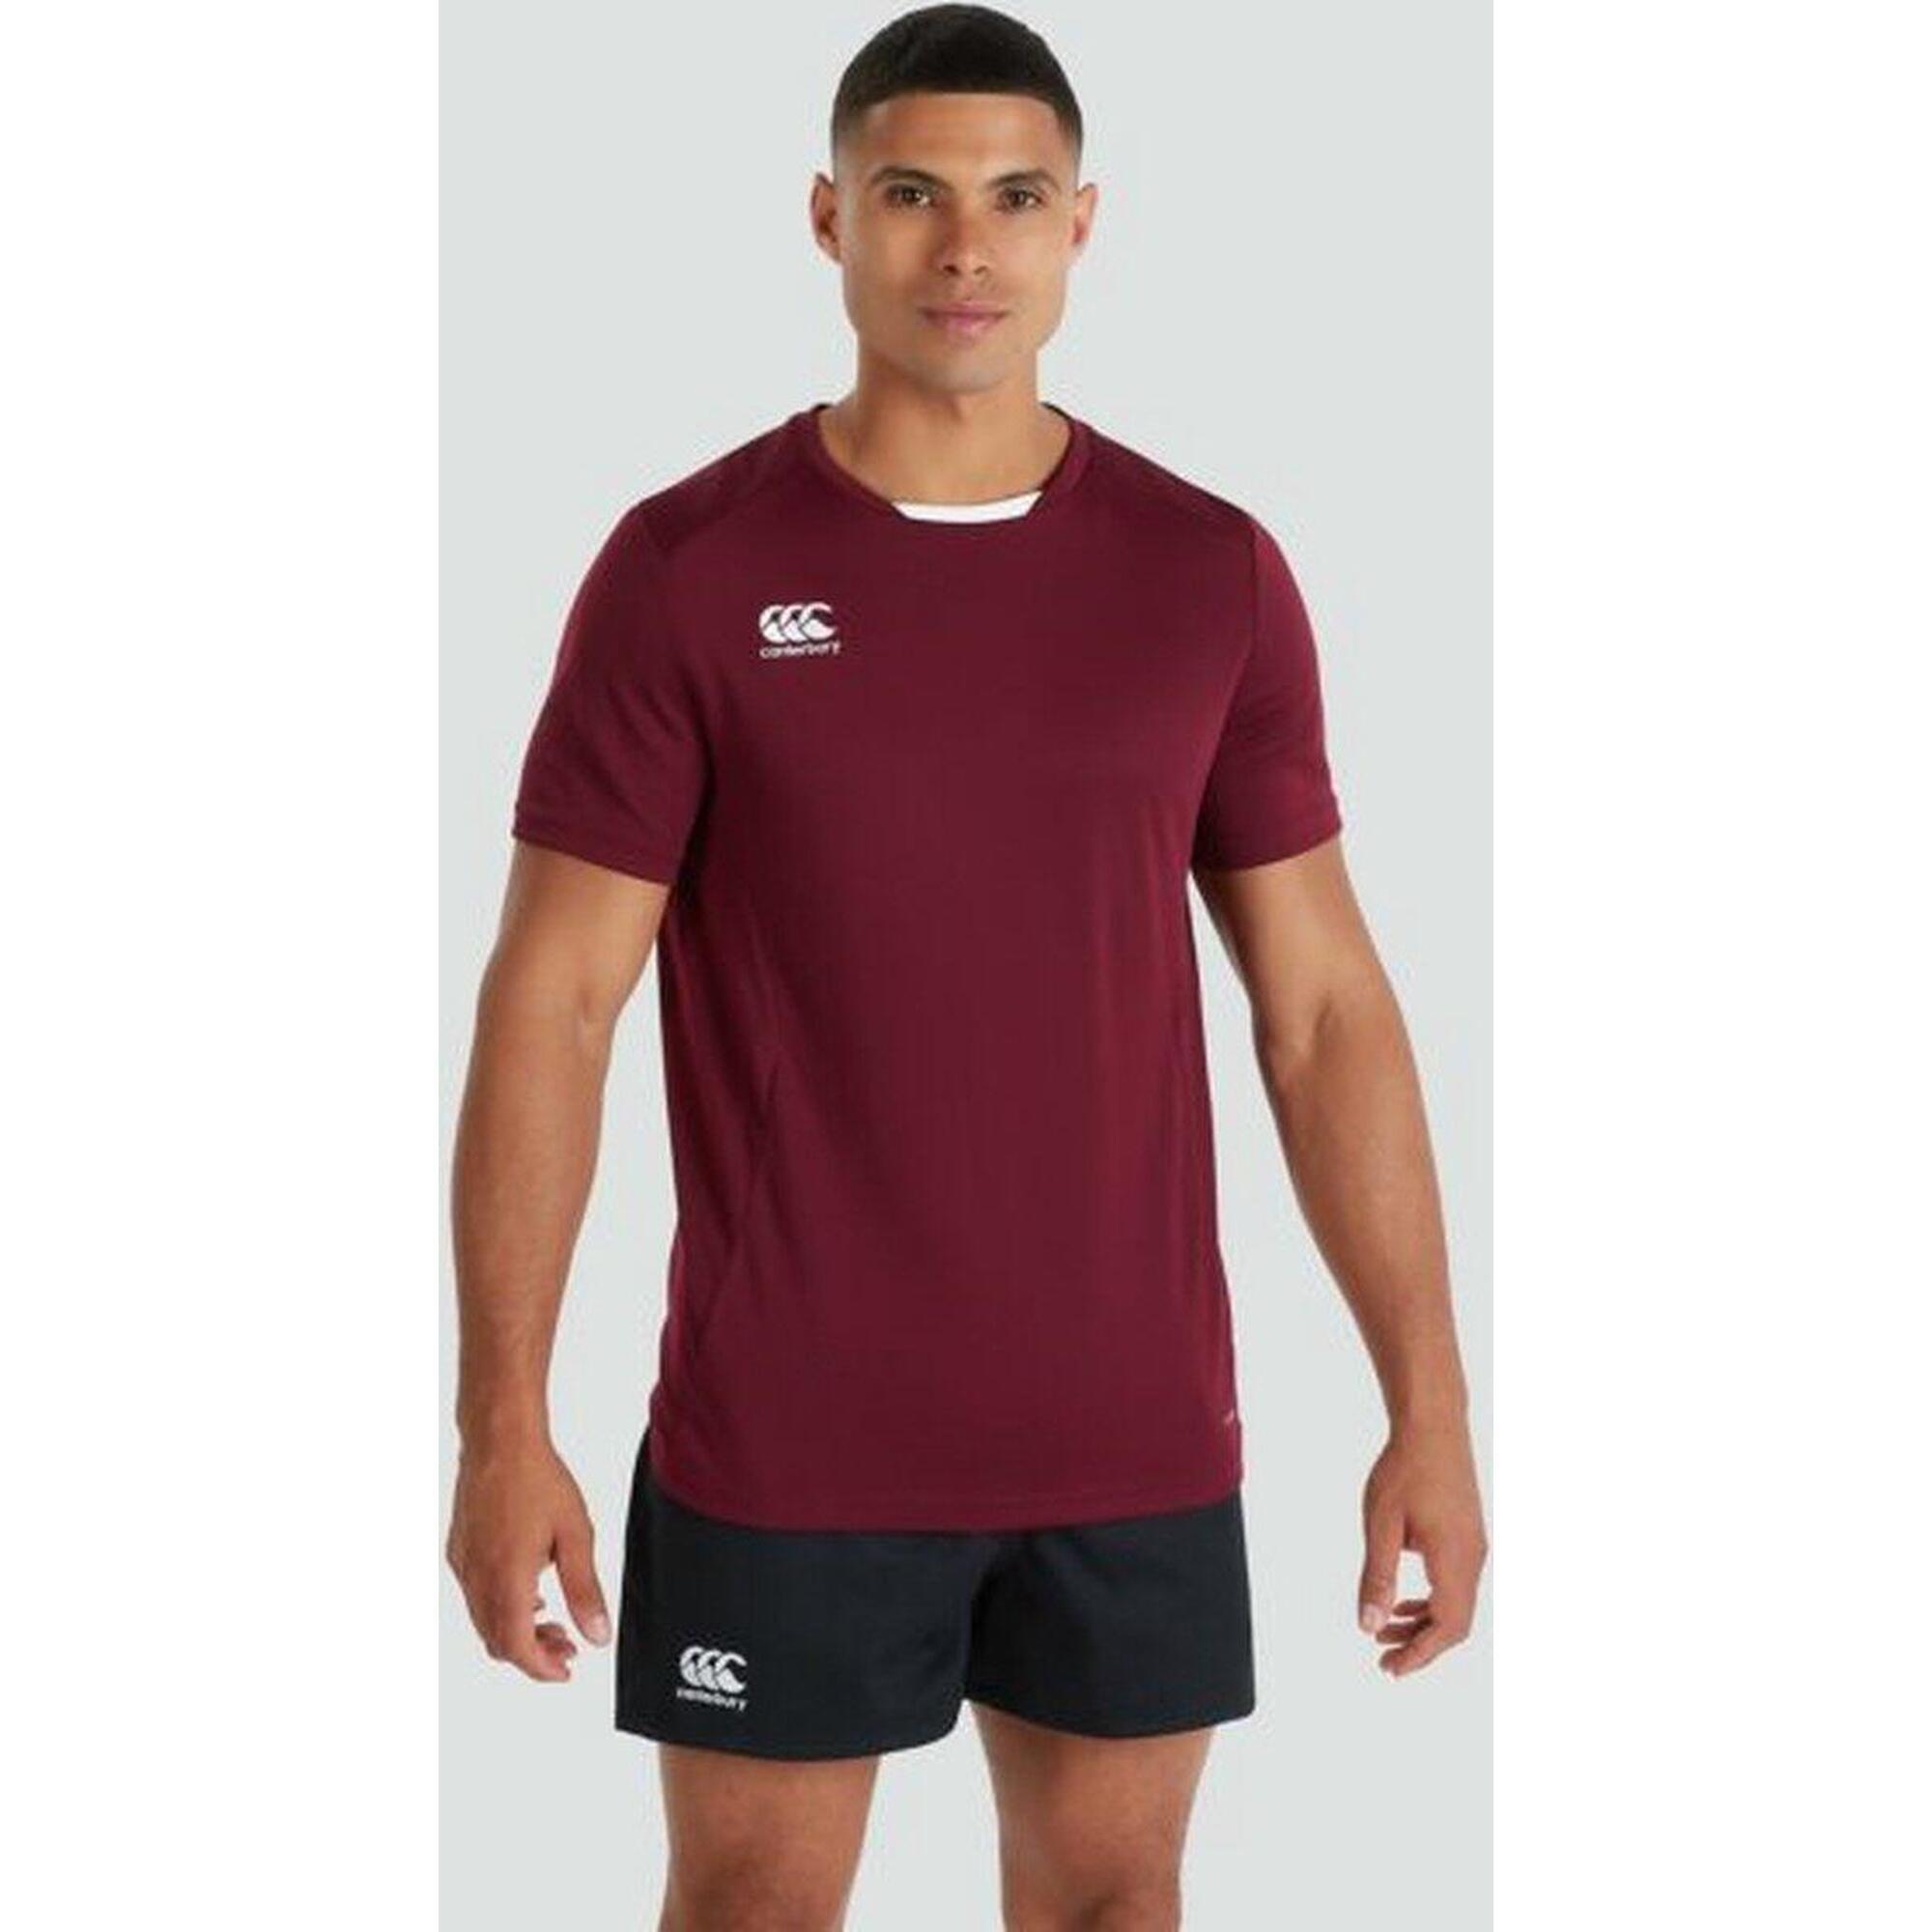 T-shirt sport rugby - hommes Adultes Marron